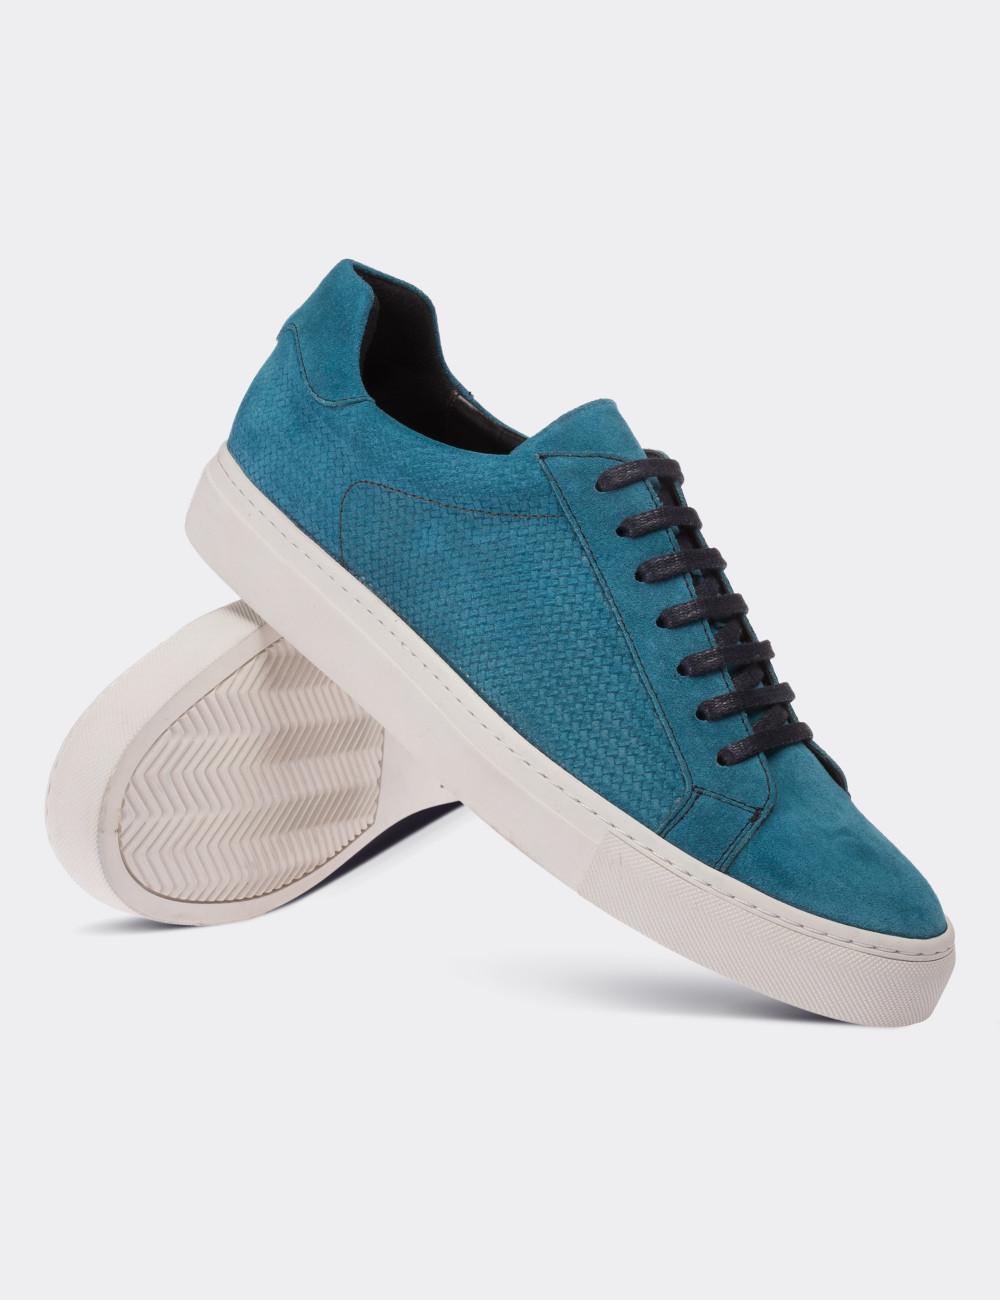 Blue Suede Leather Sneakers - 01681MMVIC01